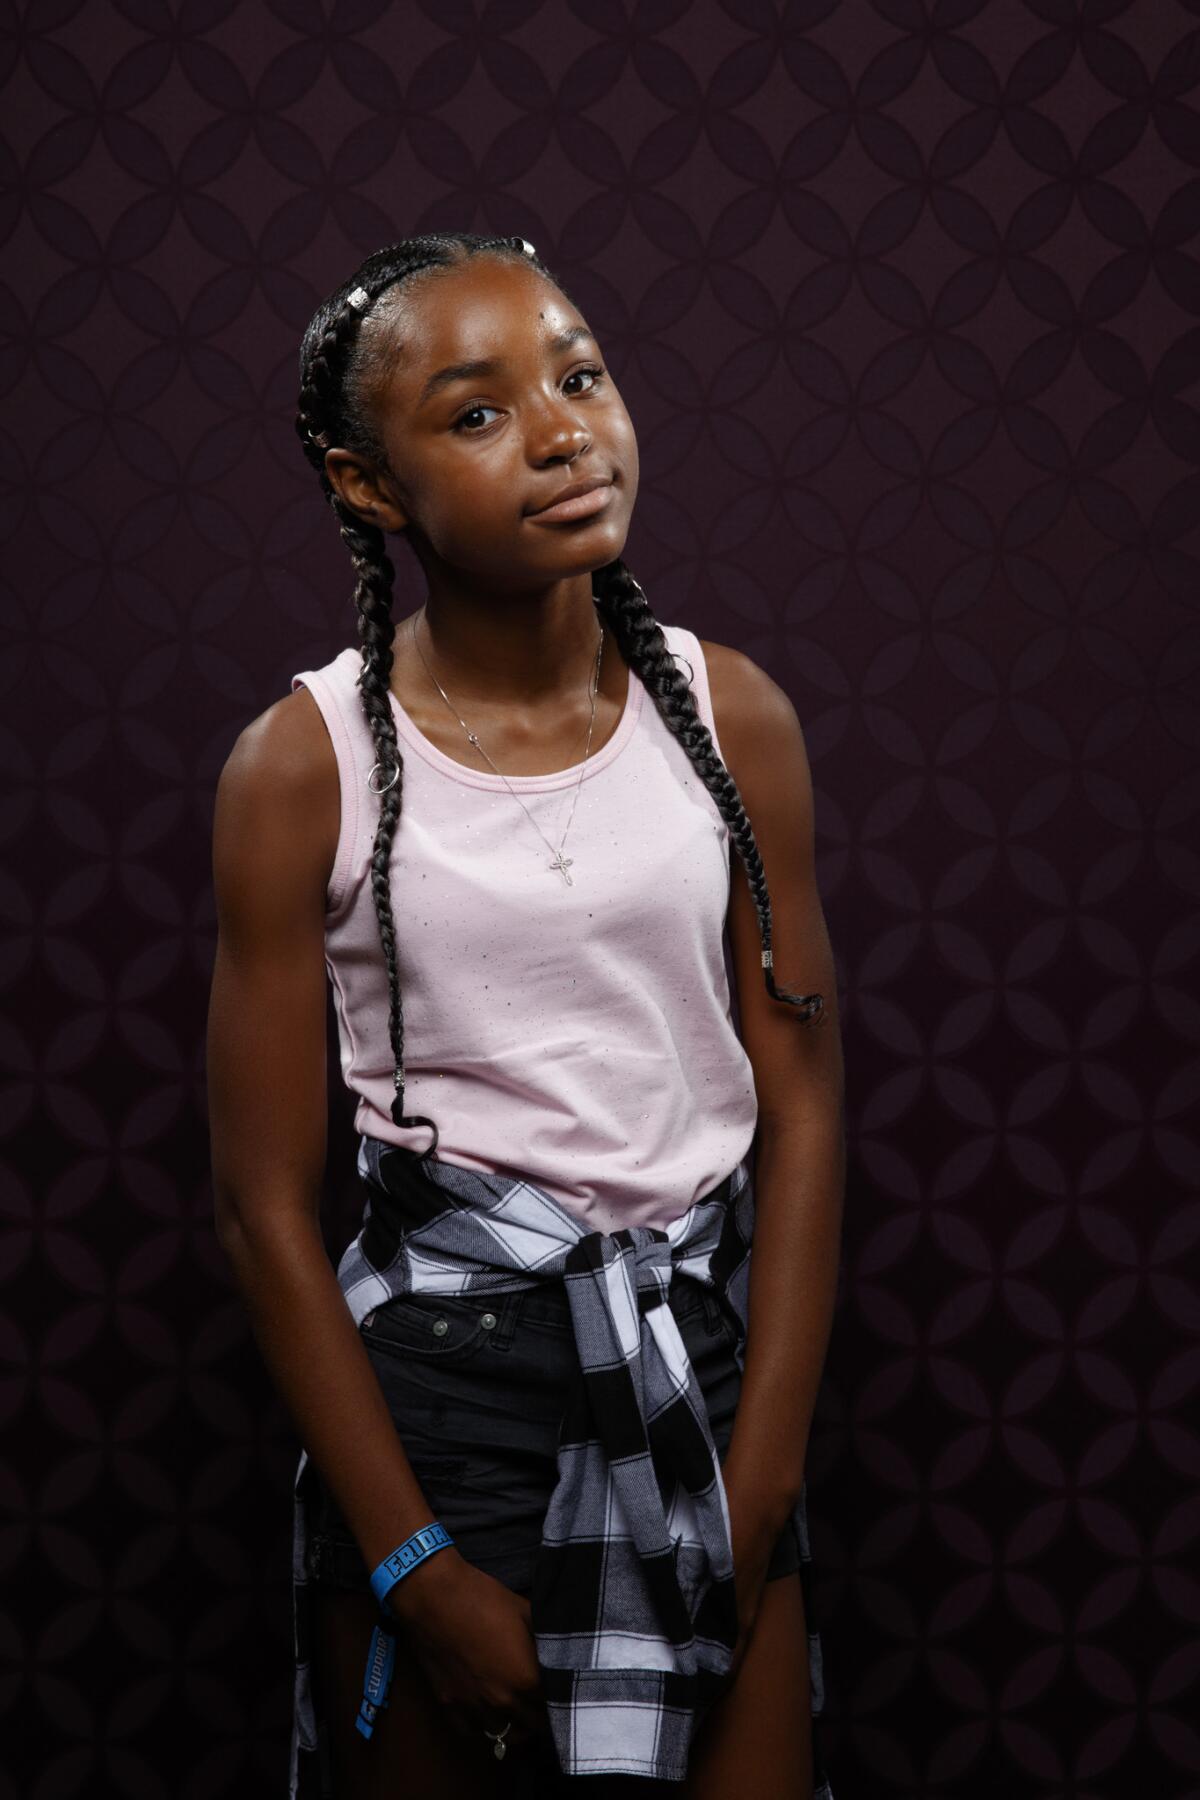 Saniyya Sidney from the television series "The Passage."